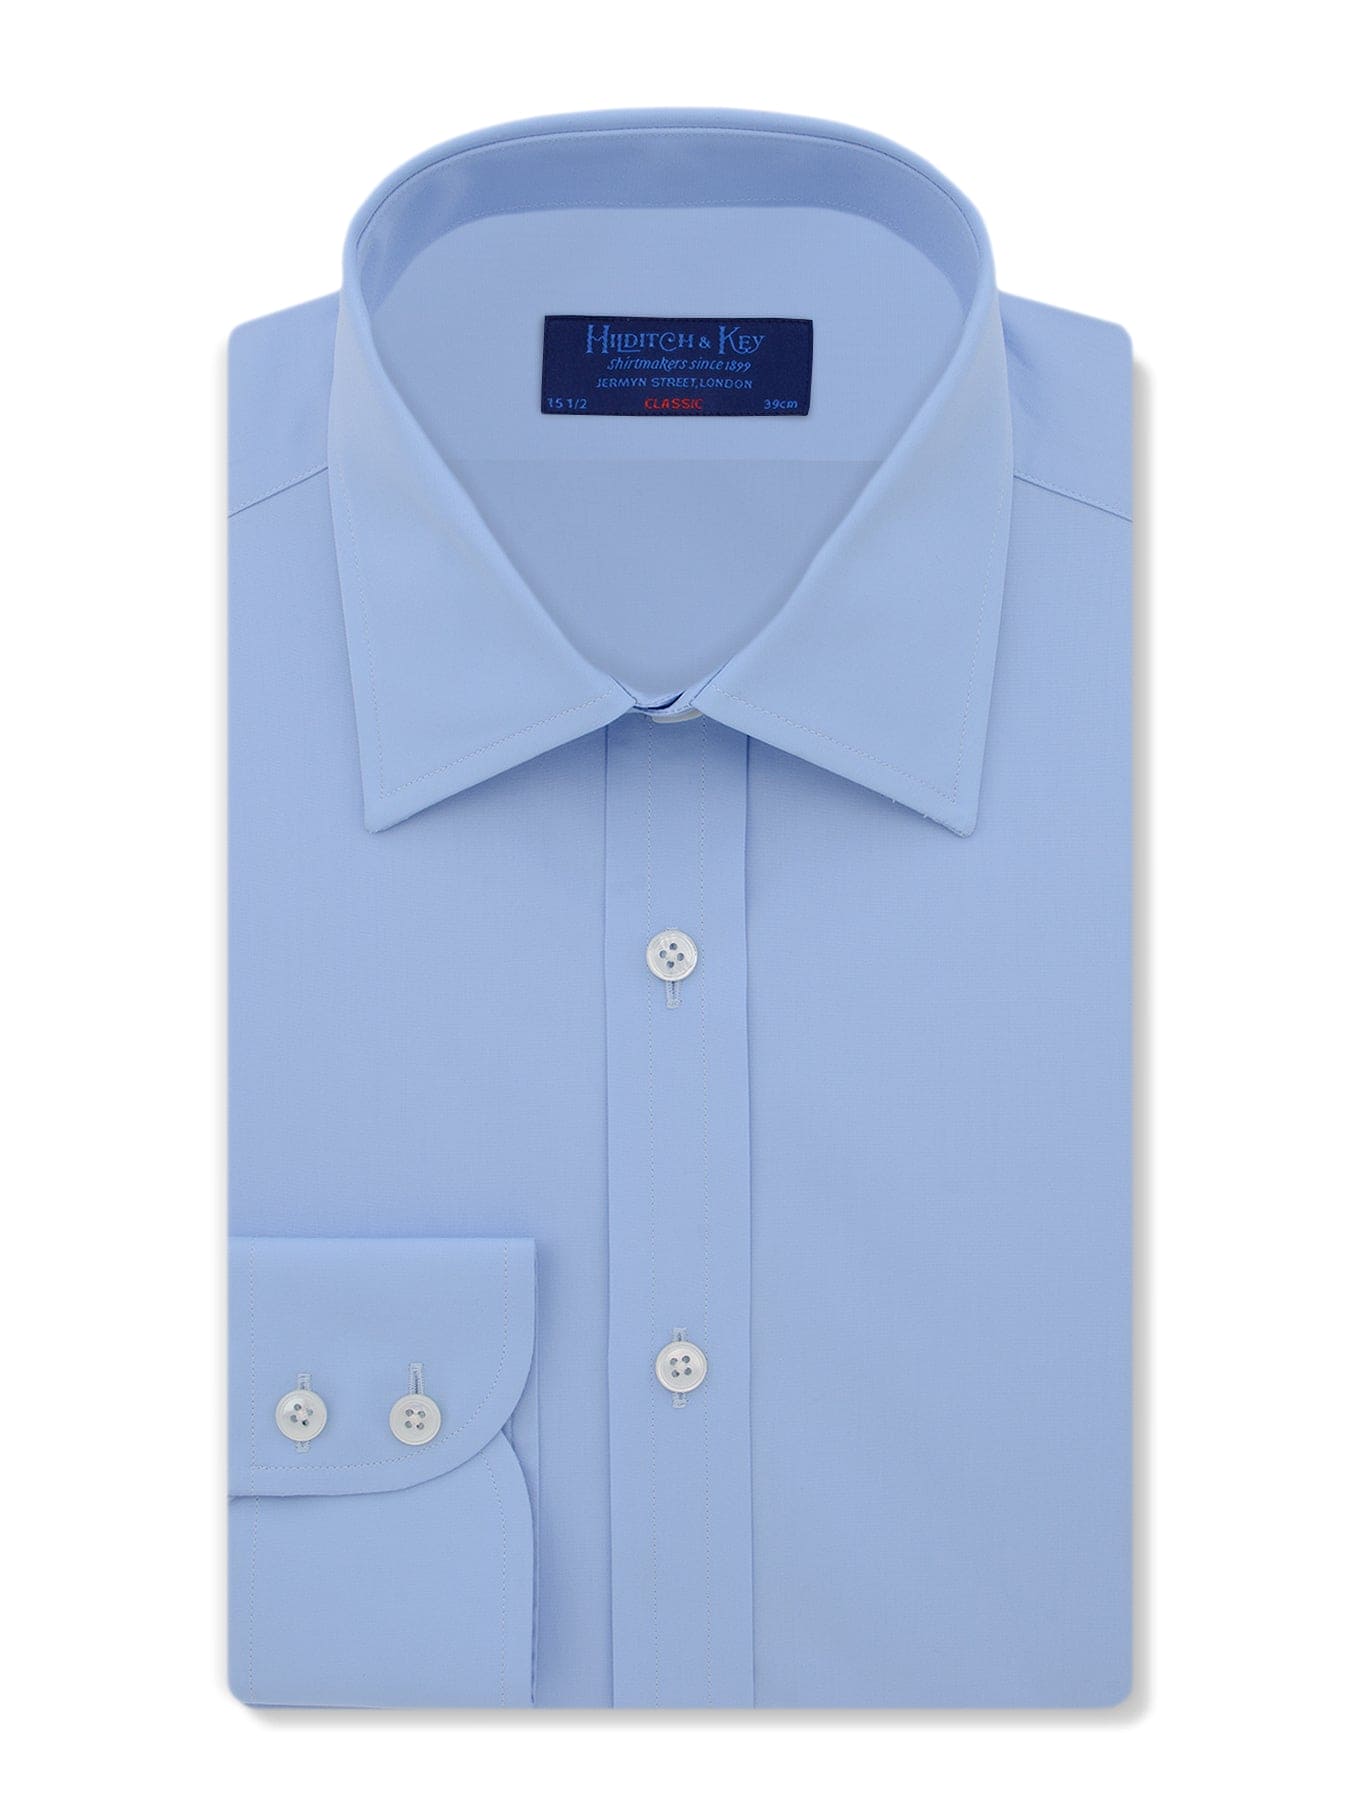 Classic Fit, Classic Collar, Two Button Cuff in Plain Ice Blue